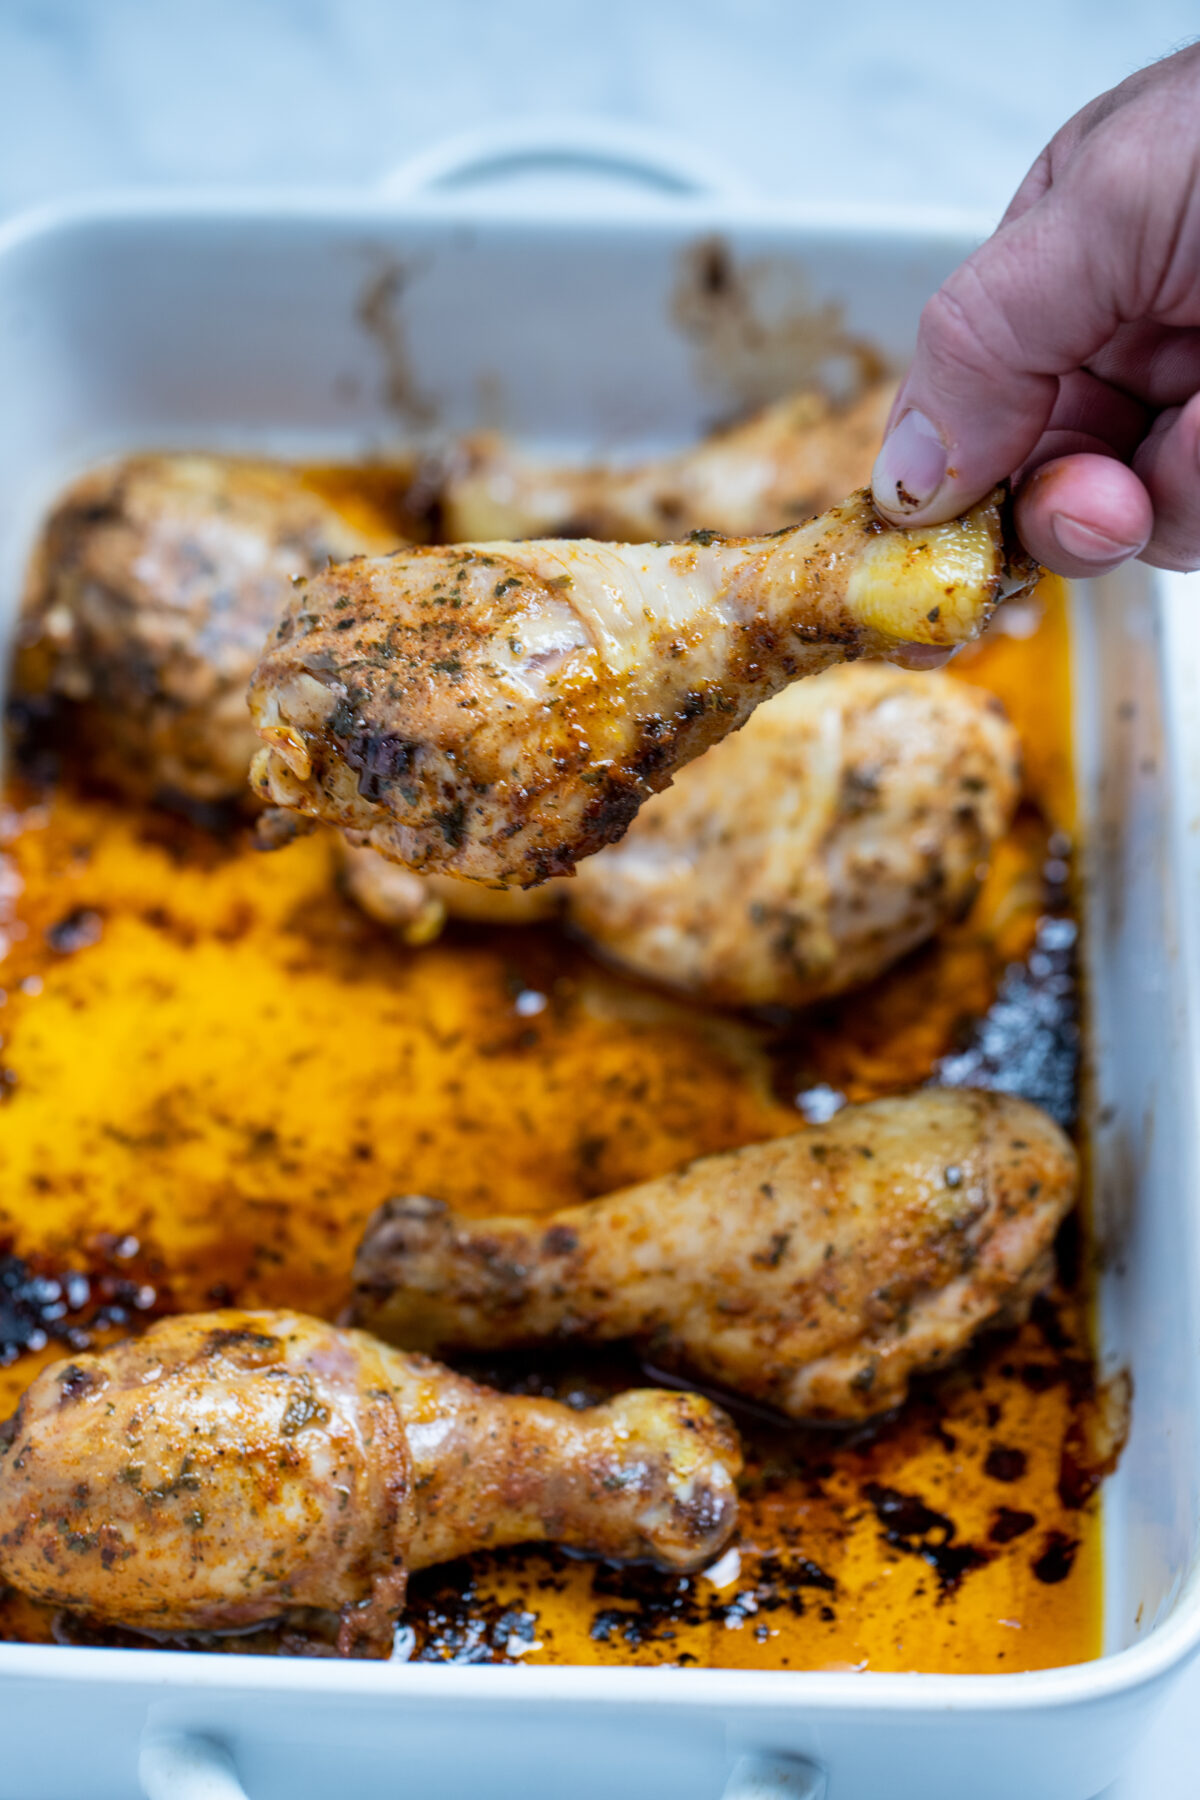 A baking dish with cooked chicken drumsticks covered in marinade with a hand picking up one drumstick.